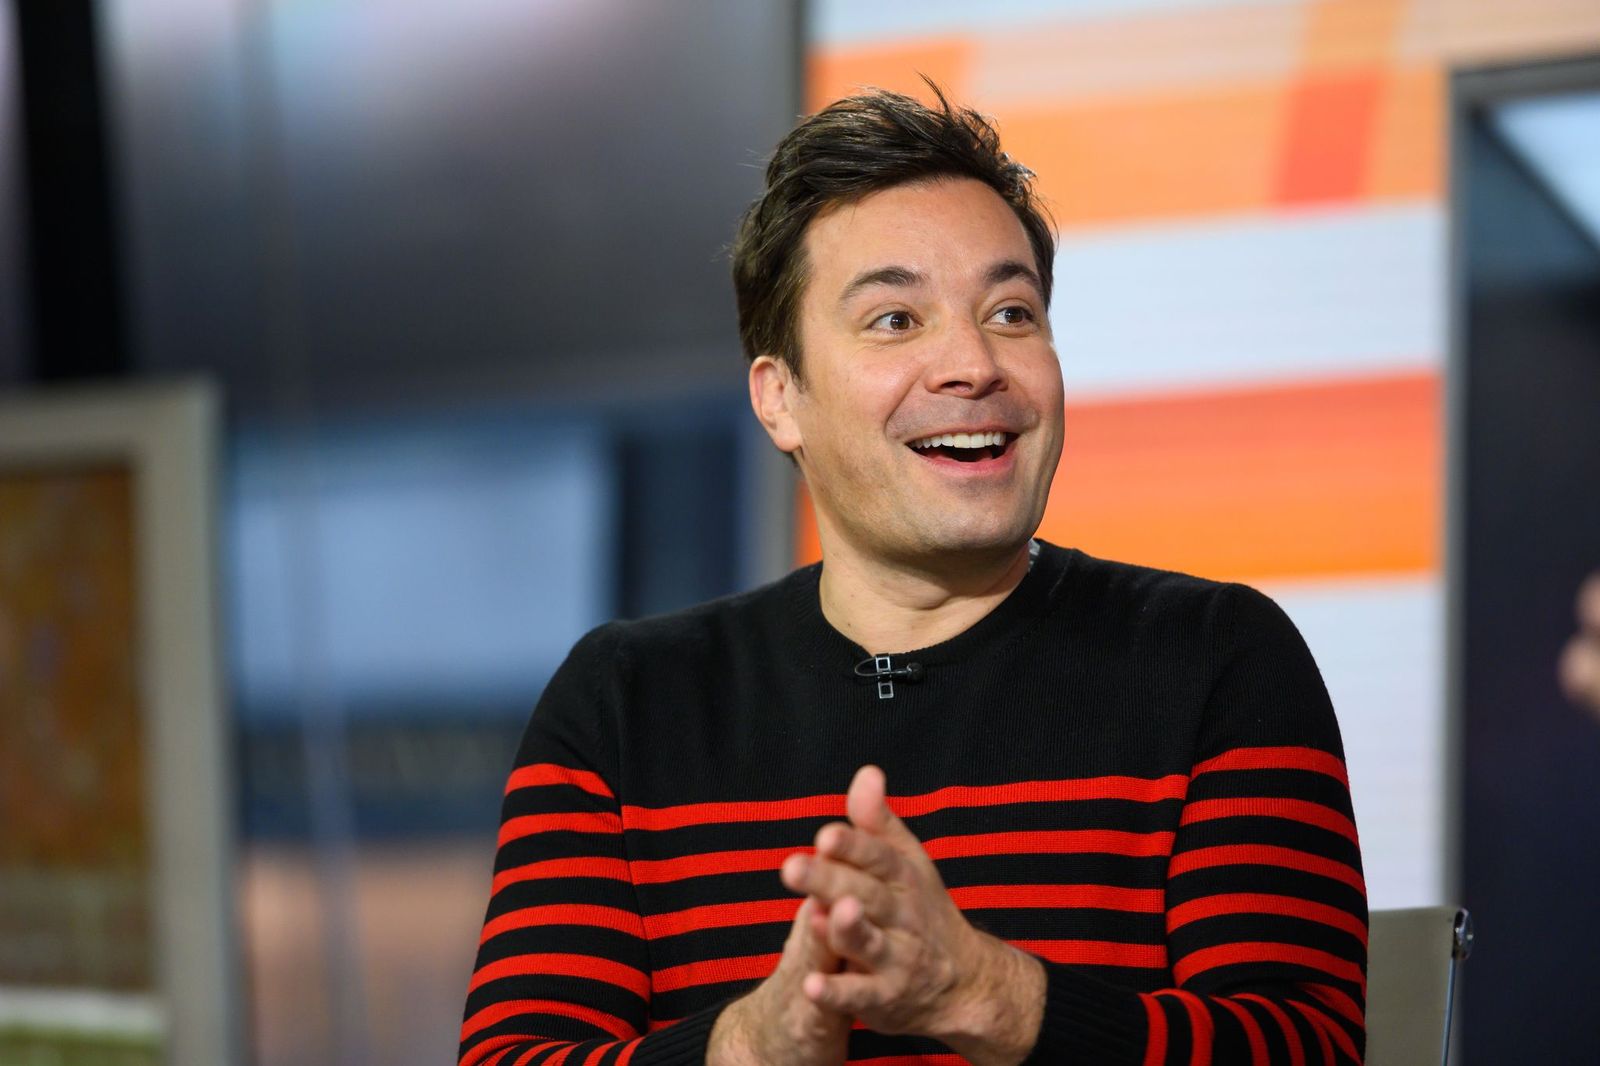 Jimmy Fallon at "The Tonight Show" on January 28, 2020 | Photo: Nathan Congleton/NBC/NBCU Photo Bank/Getty Images